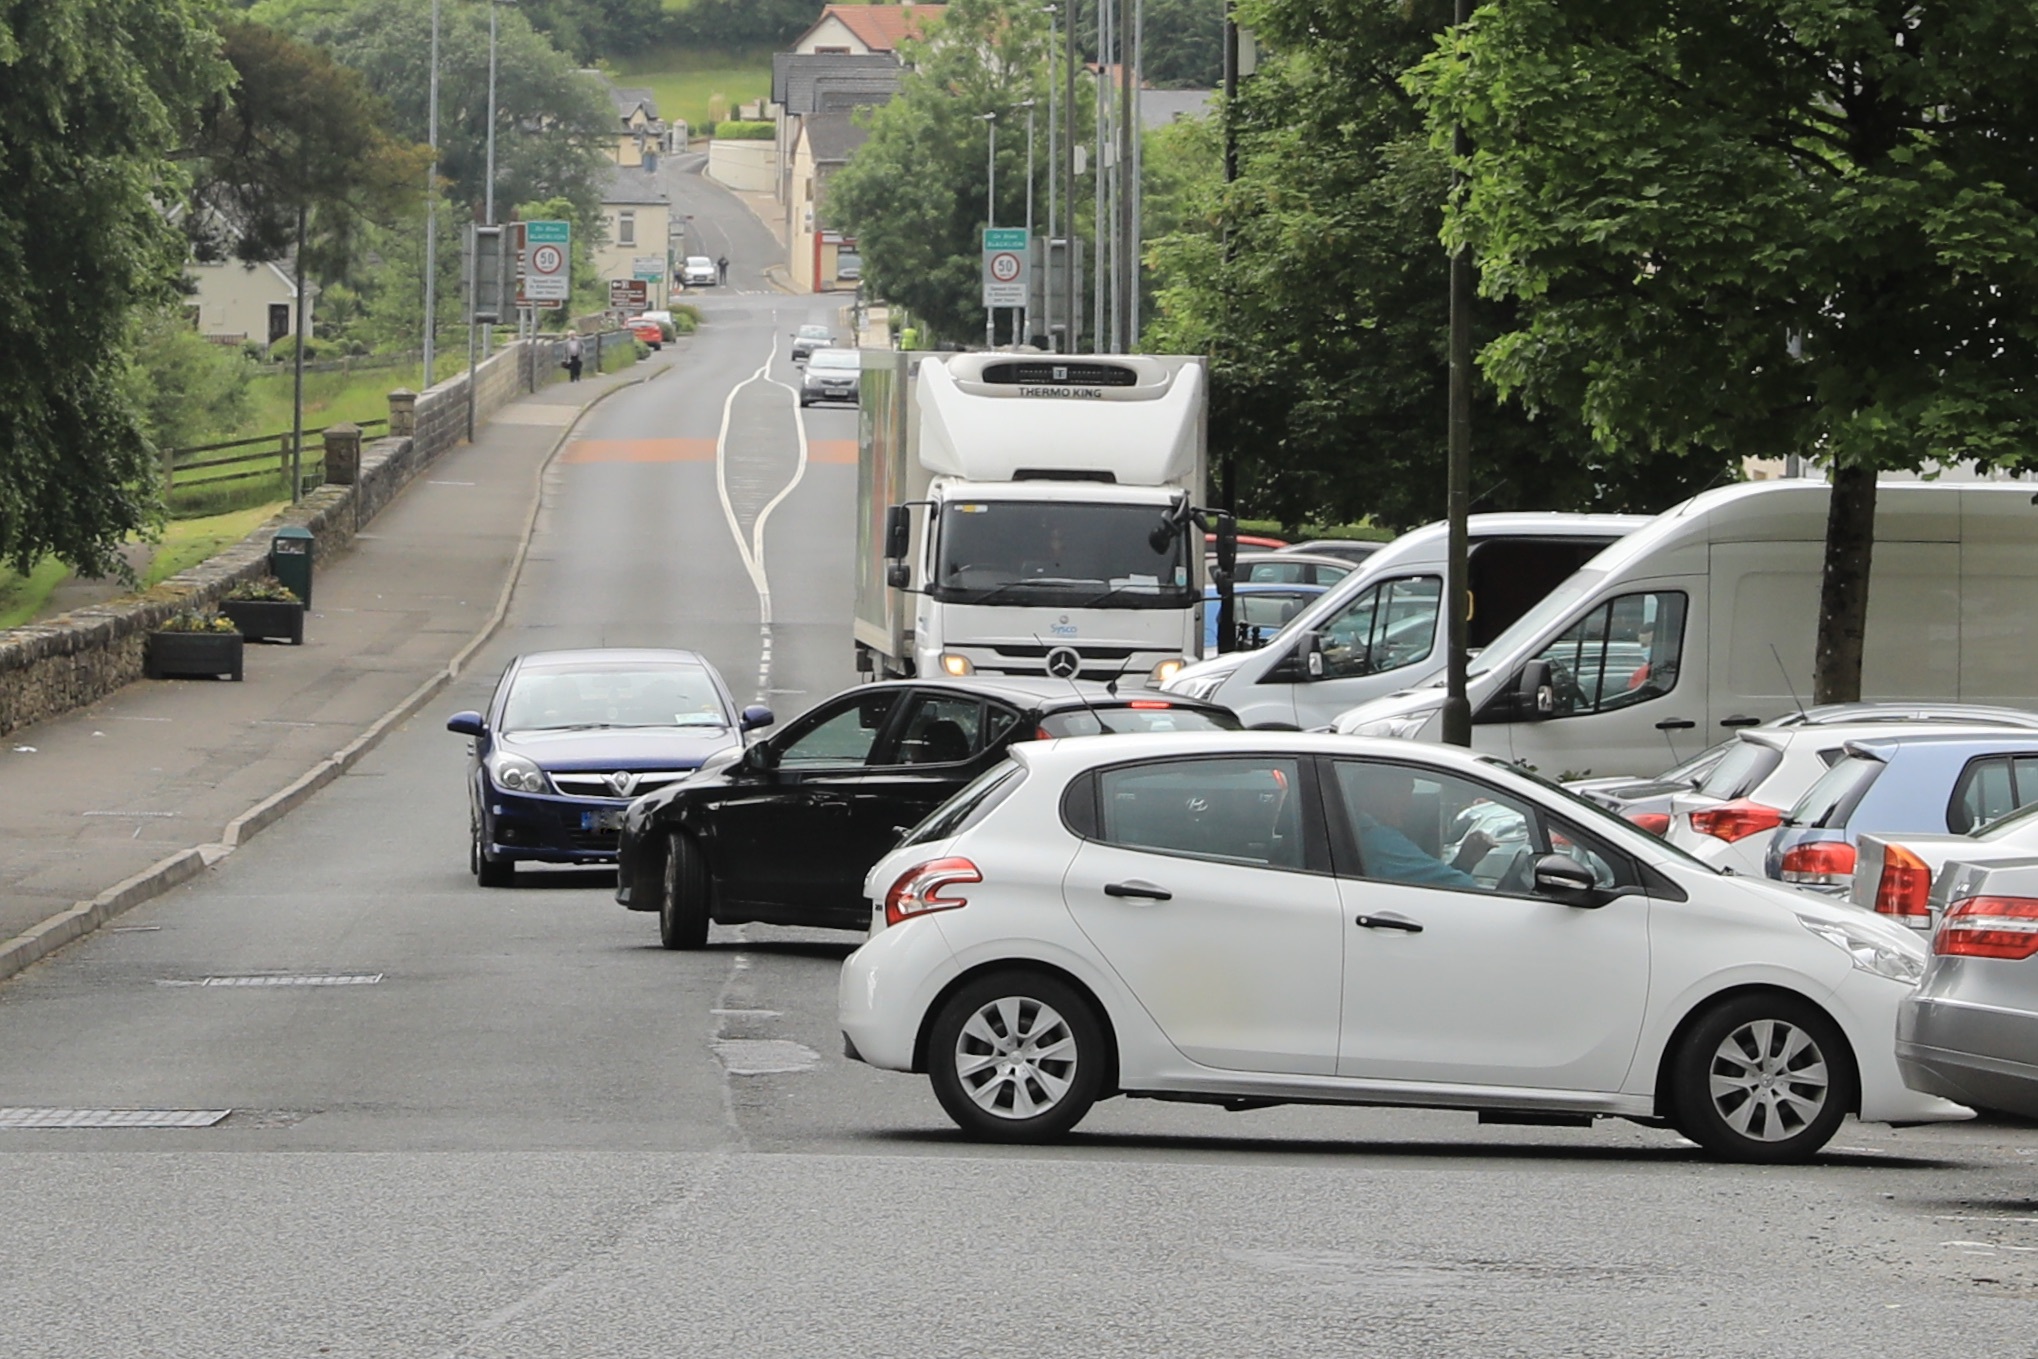 Call for investment in Belcoo to help tackle traffic issues